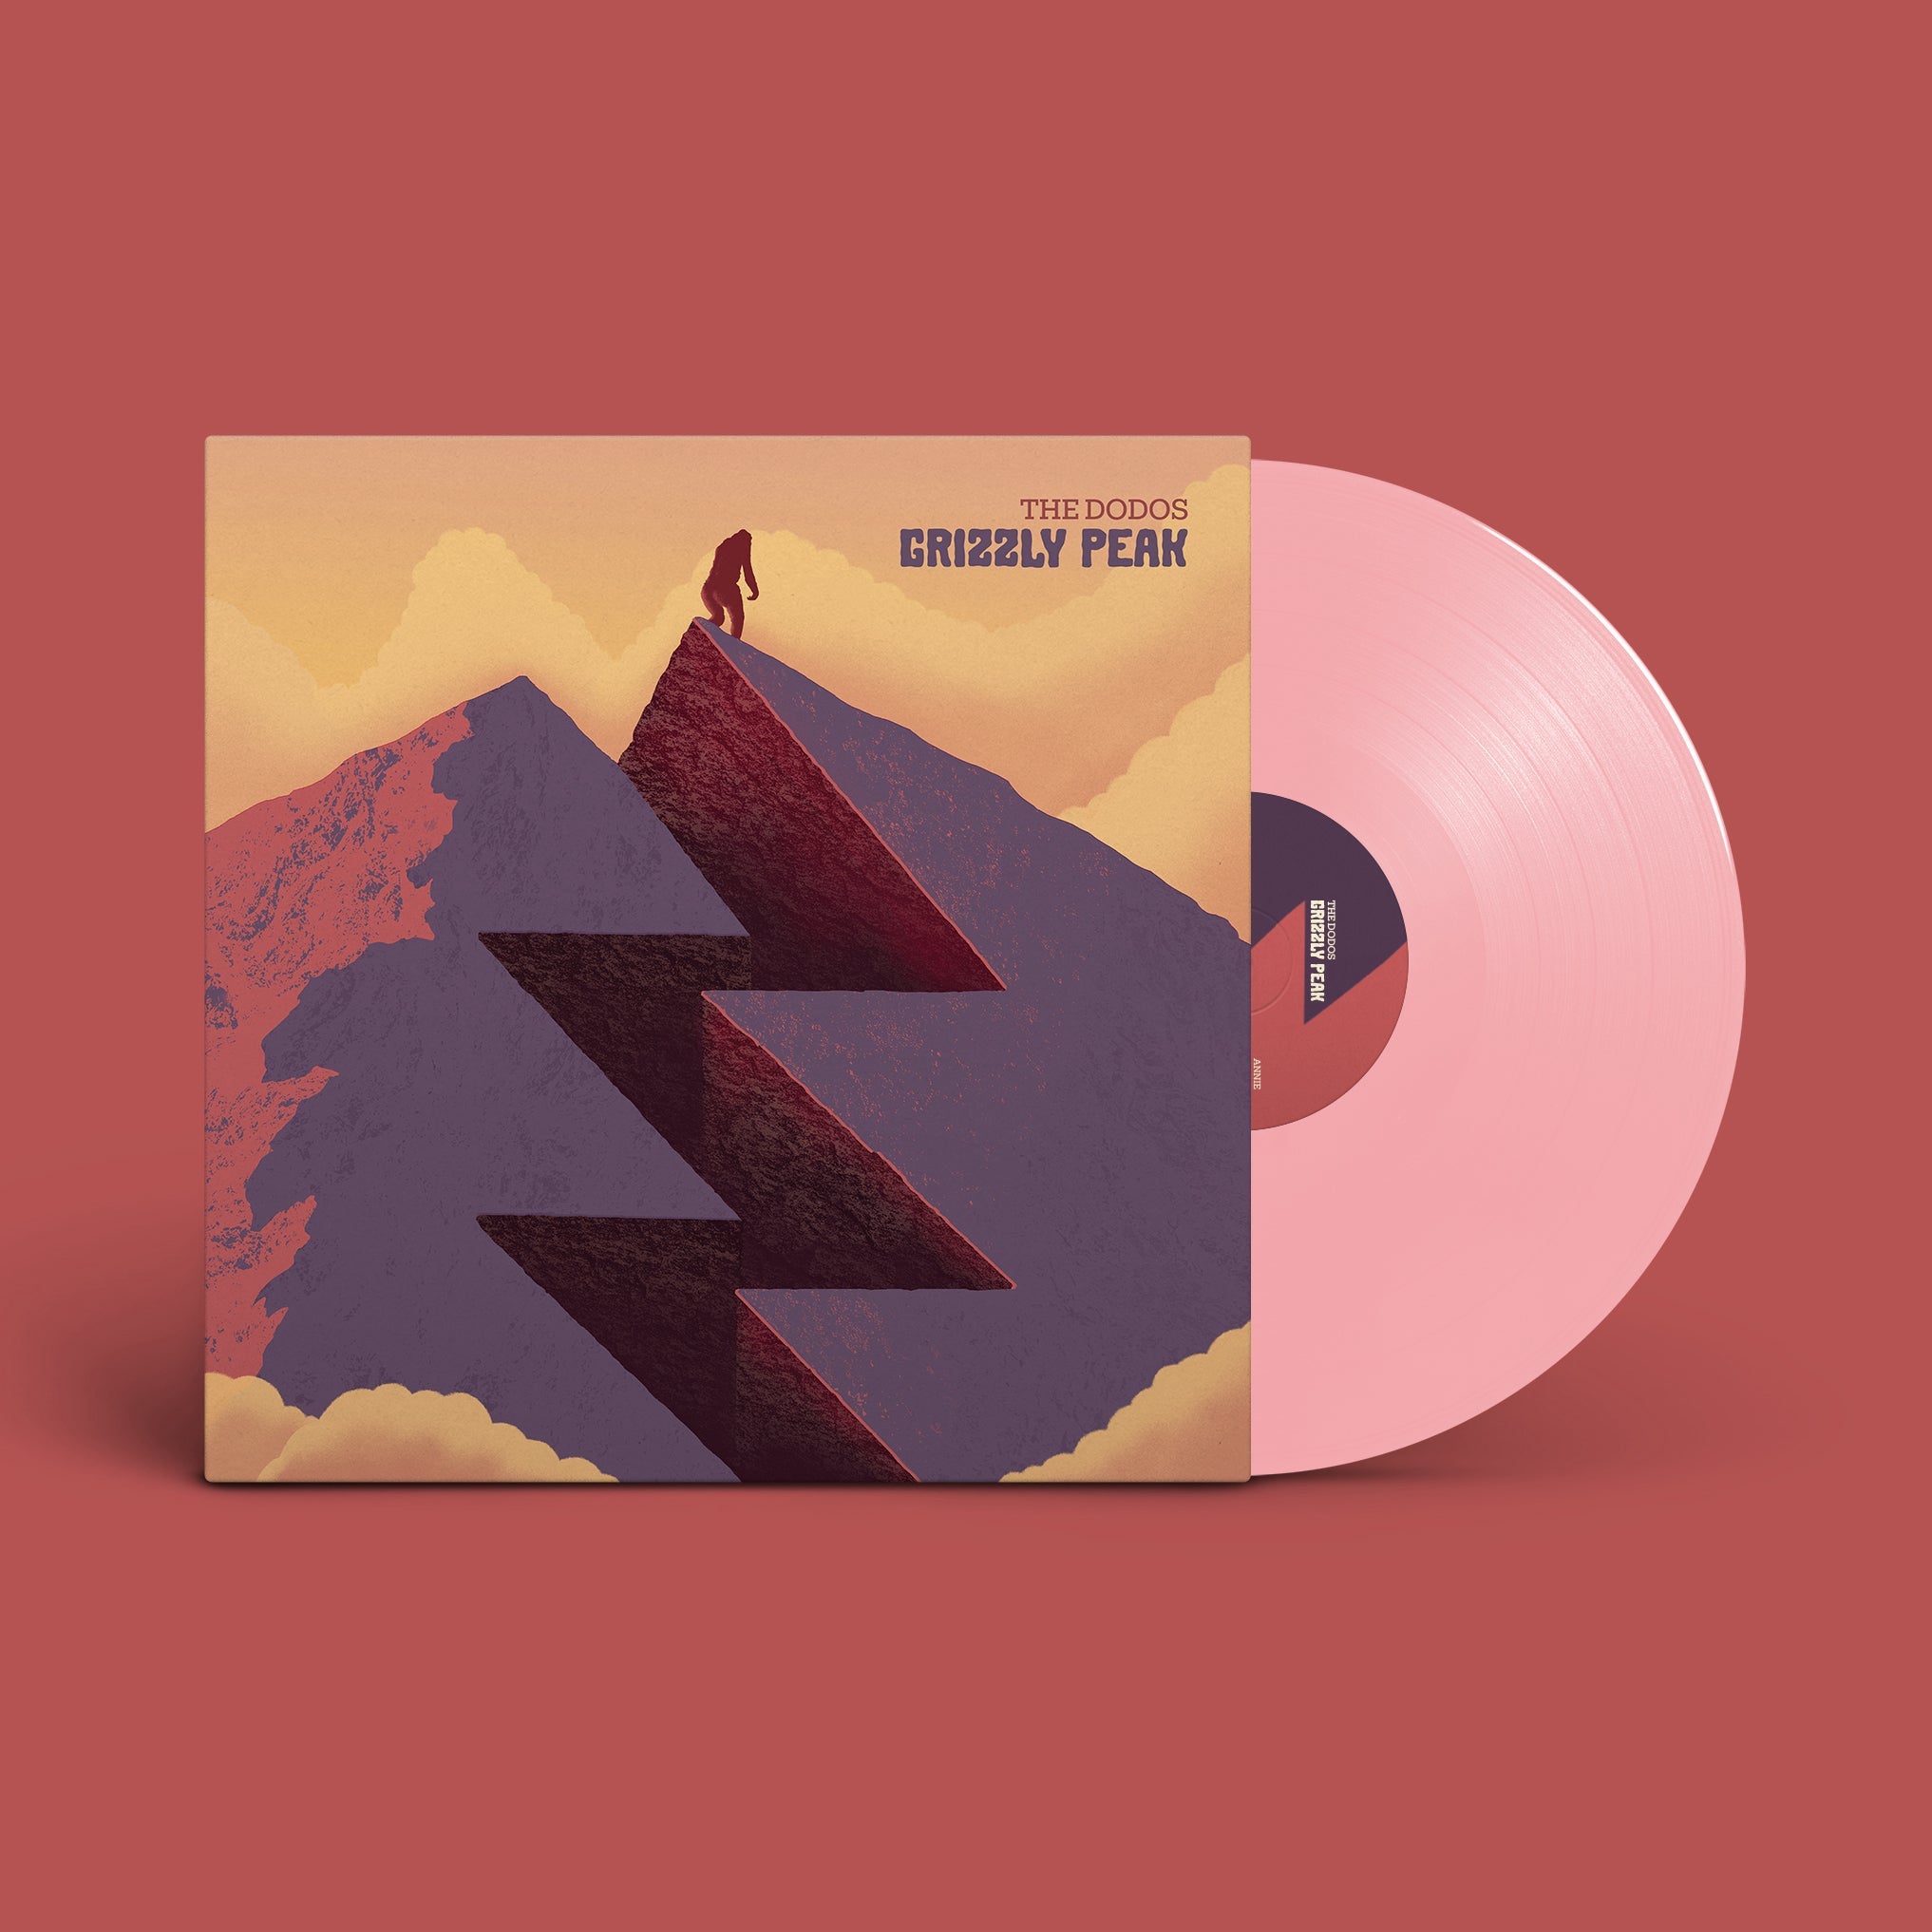 The Dodos - Grizzly Peak - Pink Vinyl - Steadfast Records